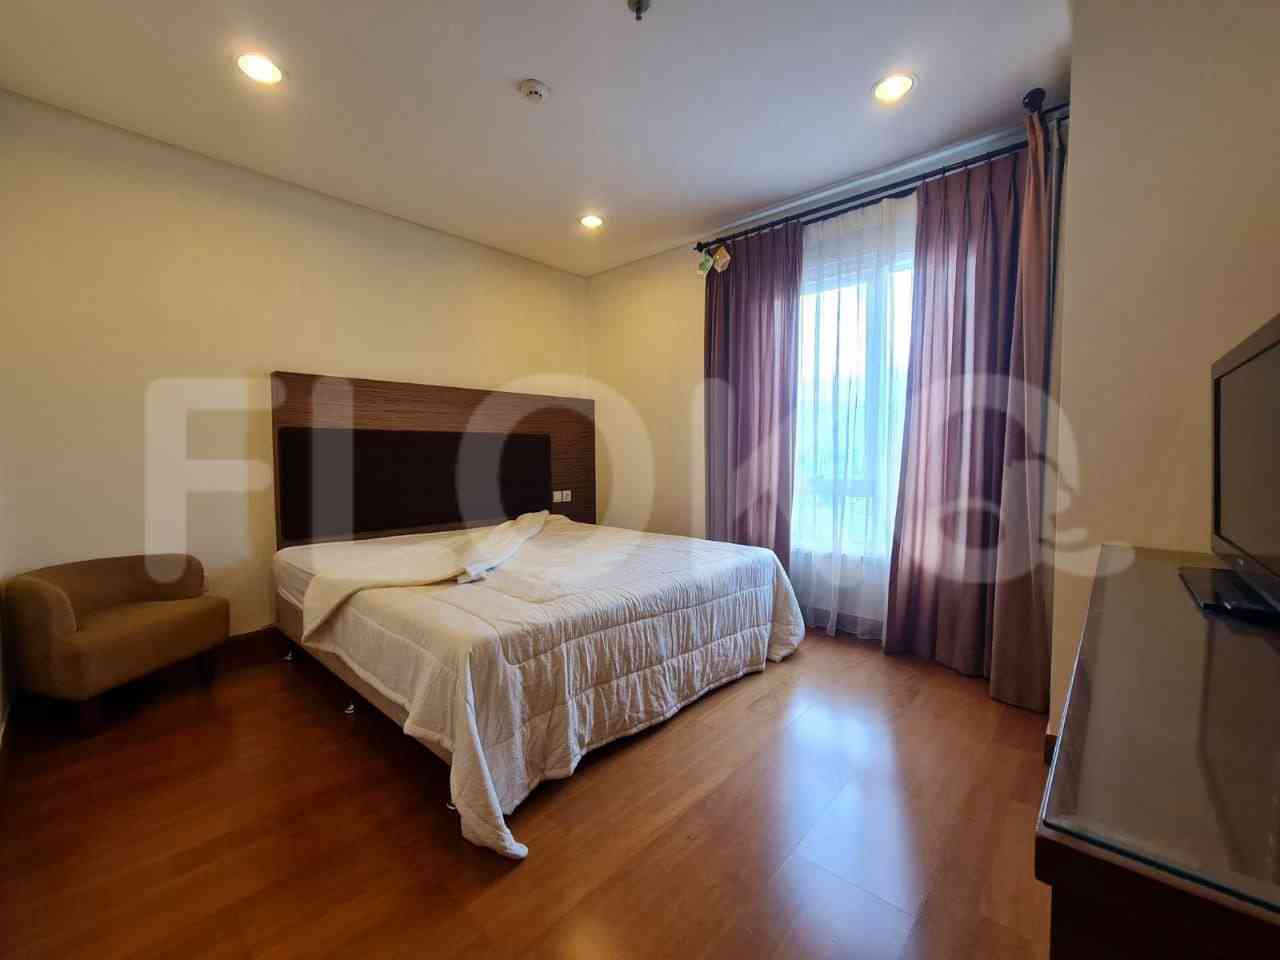 3 Bedroom on 20th Floor for Rent in Permata Hijau Residence - fpe694 2